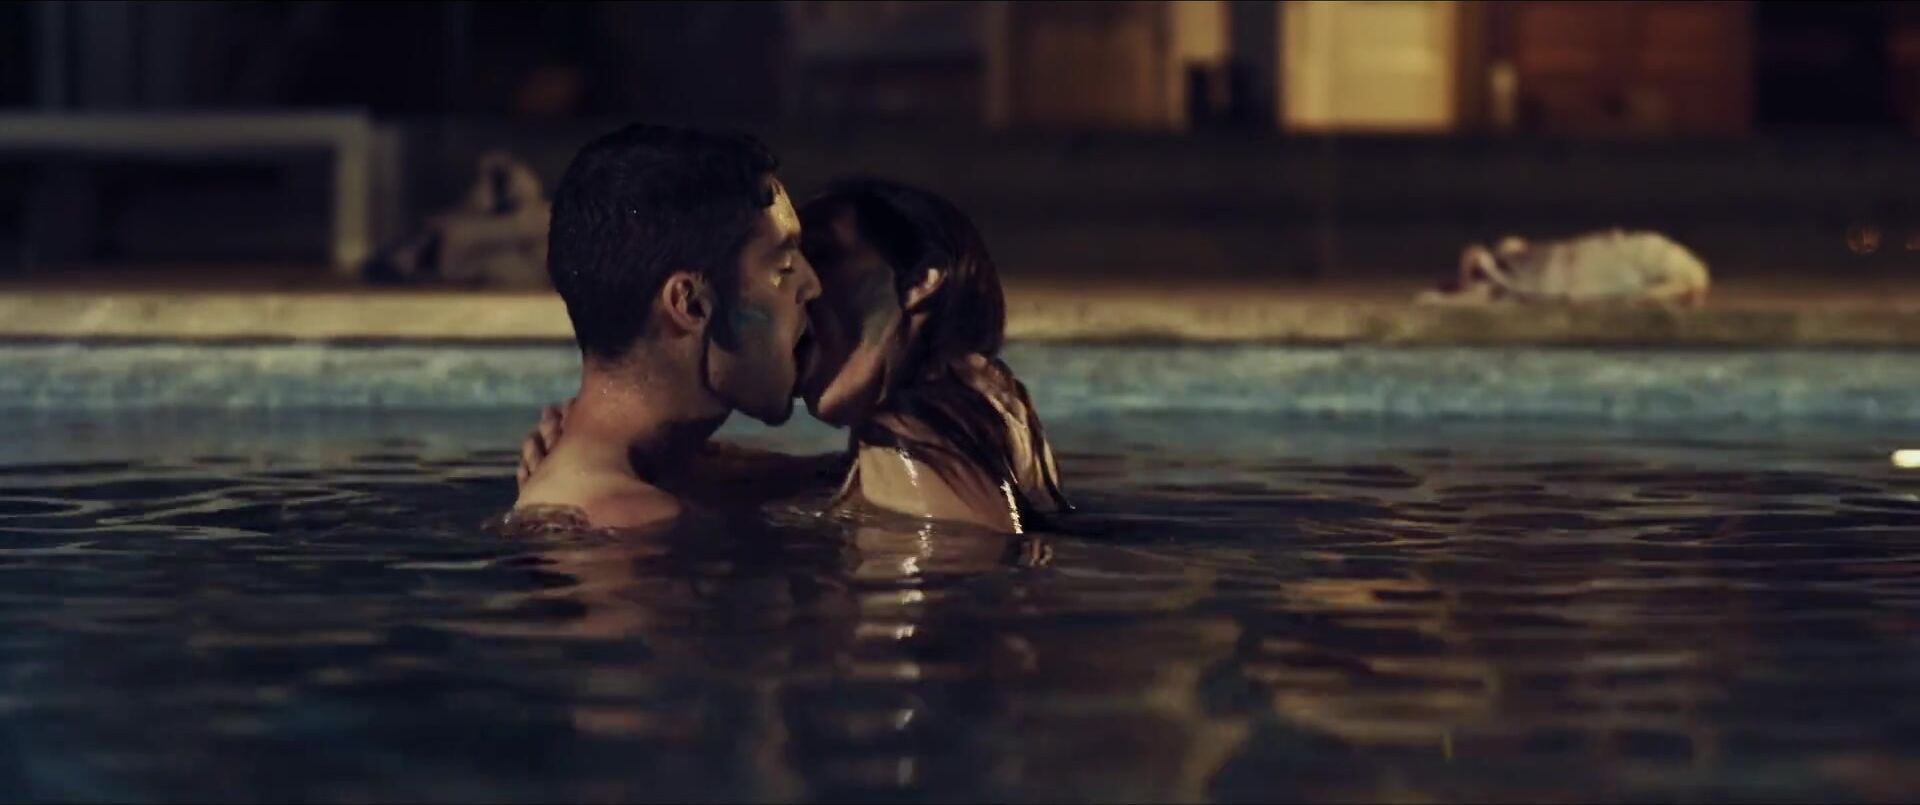 Bareback Ryan Bown kisses Clare McCann in pool and gives sex in bed in feature movie Benefited Leaked - 2